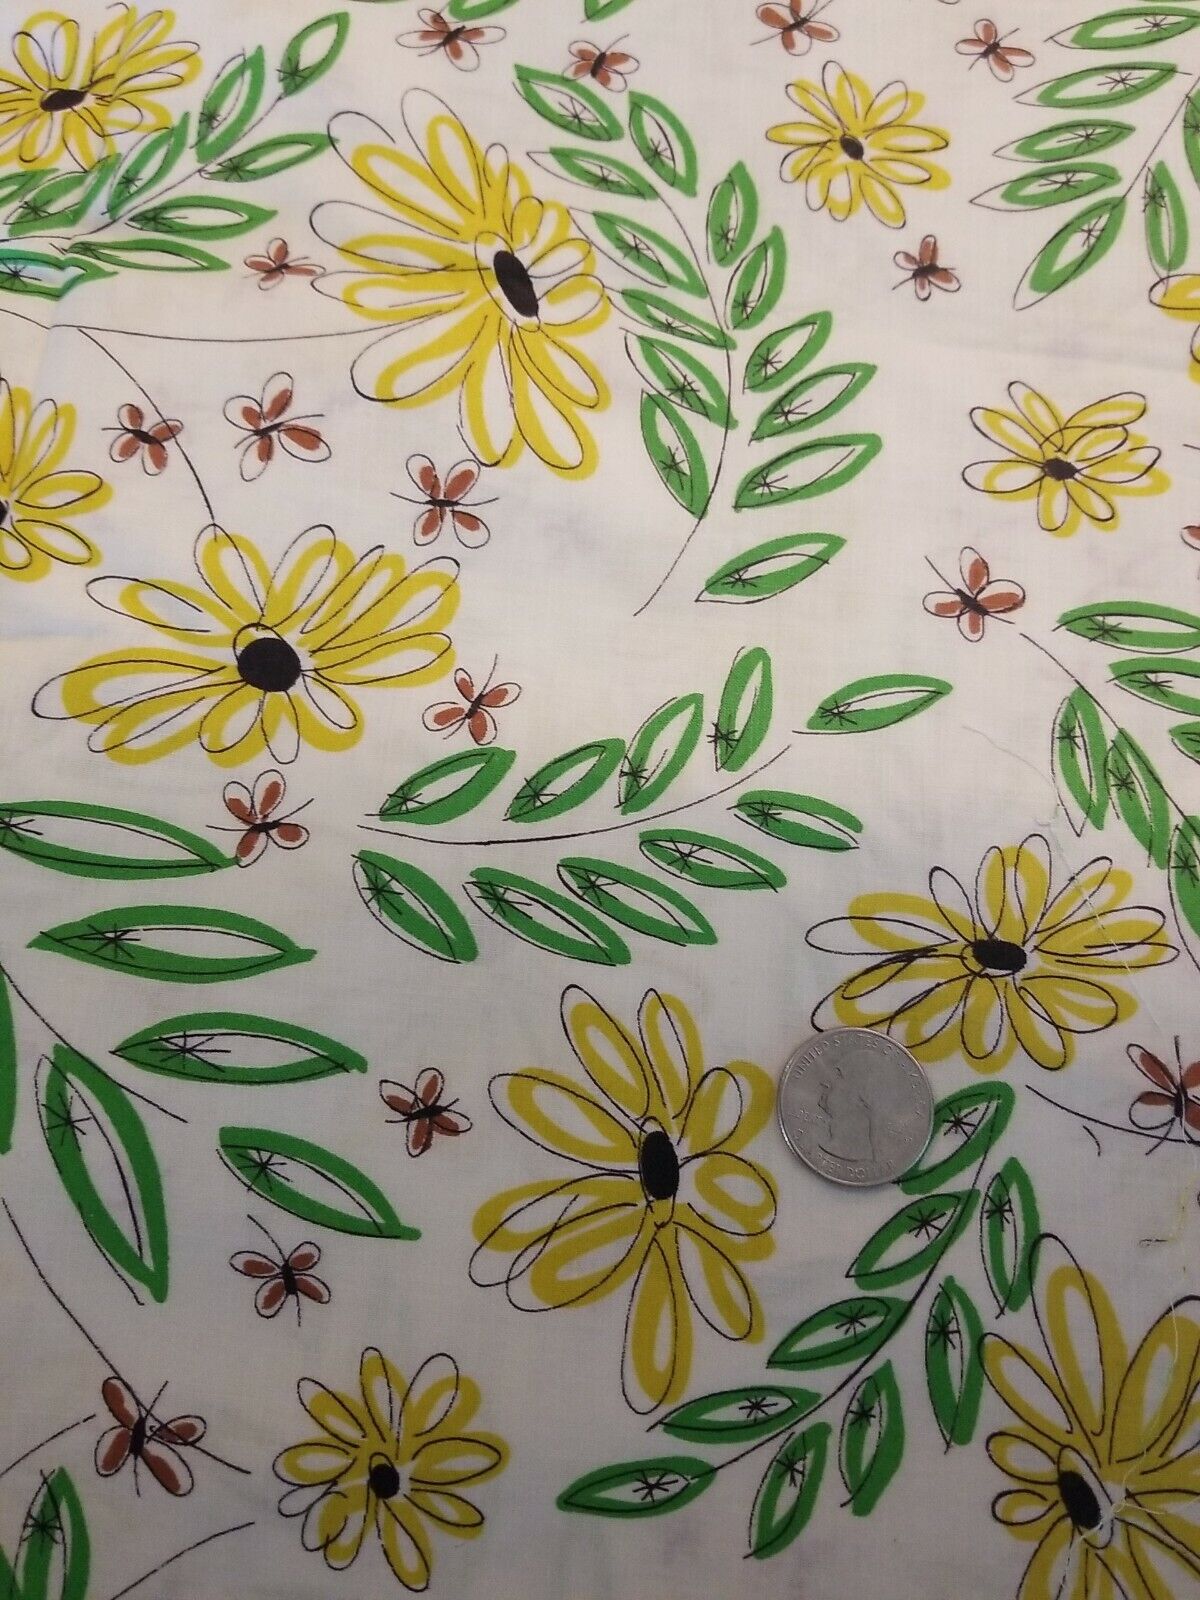 Over 60 Year Old Fabric  Abstact Daisies & Butterflies 36 In Wide Cotton 2 Yards